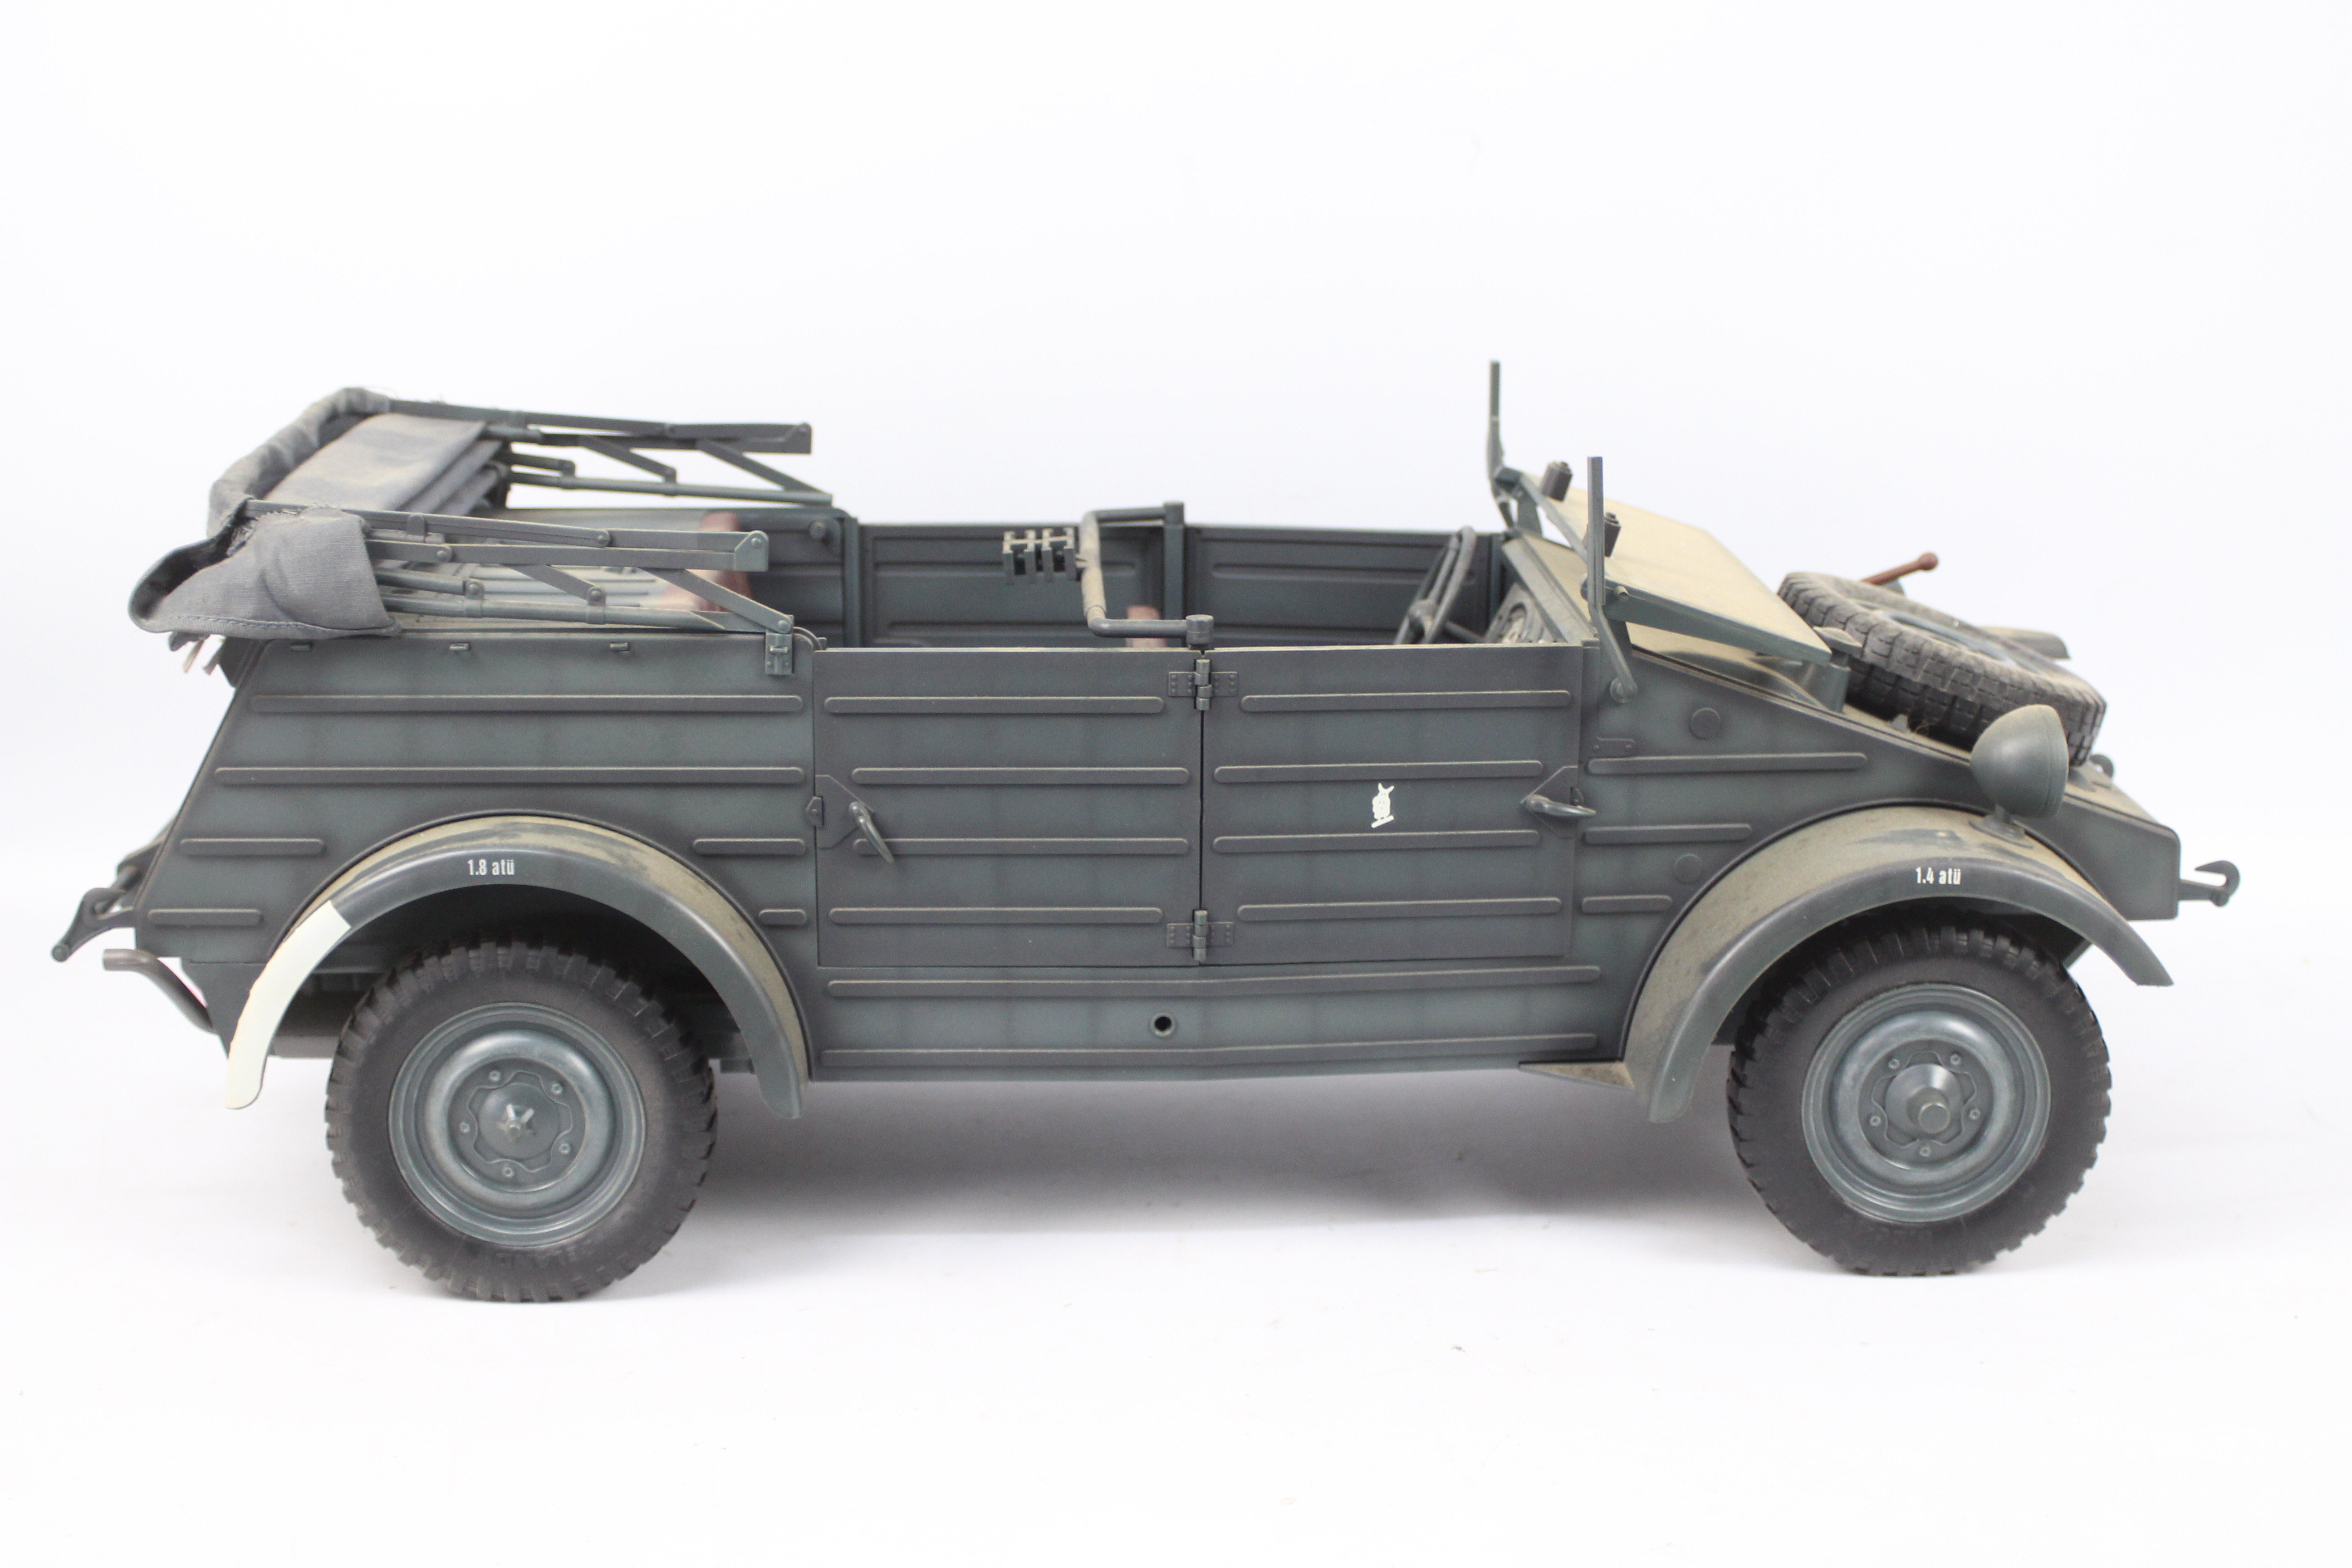 Dragon - A boxed Dragon #710150 WWII German Forces 1:6 scale Kubelwagen Type 82. - Image 7 of 10